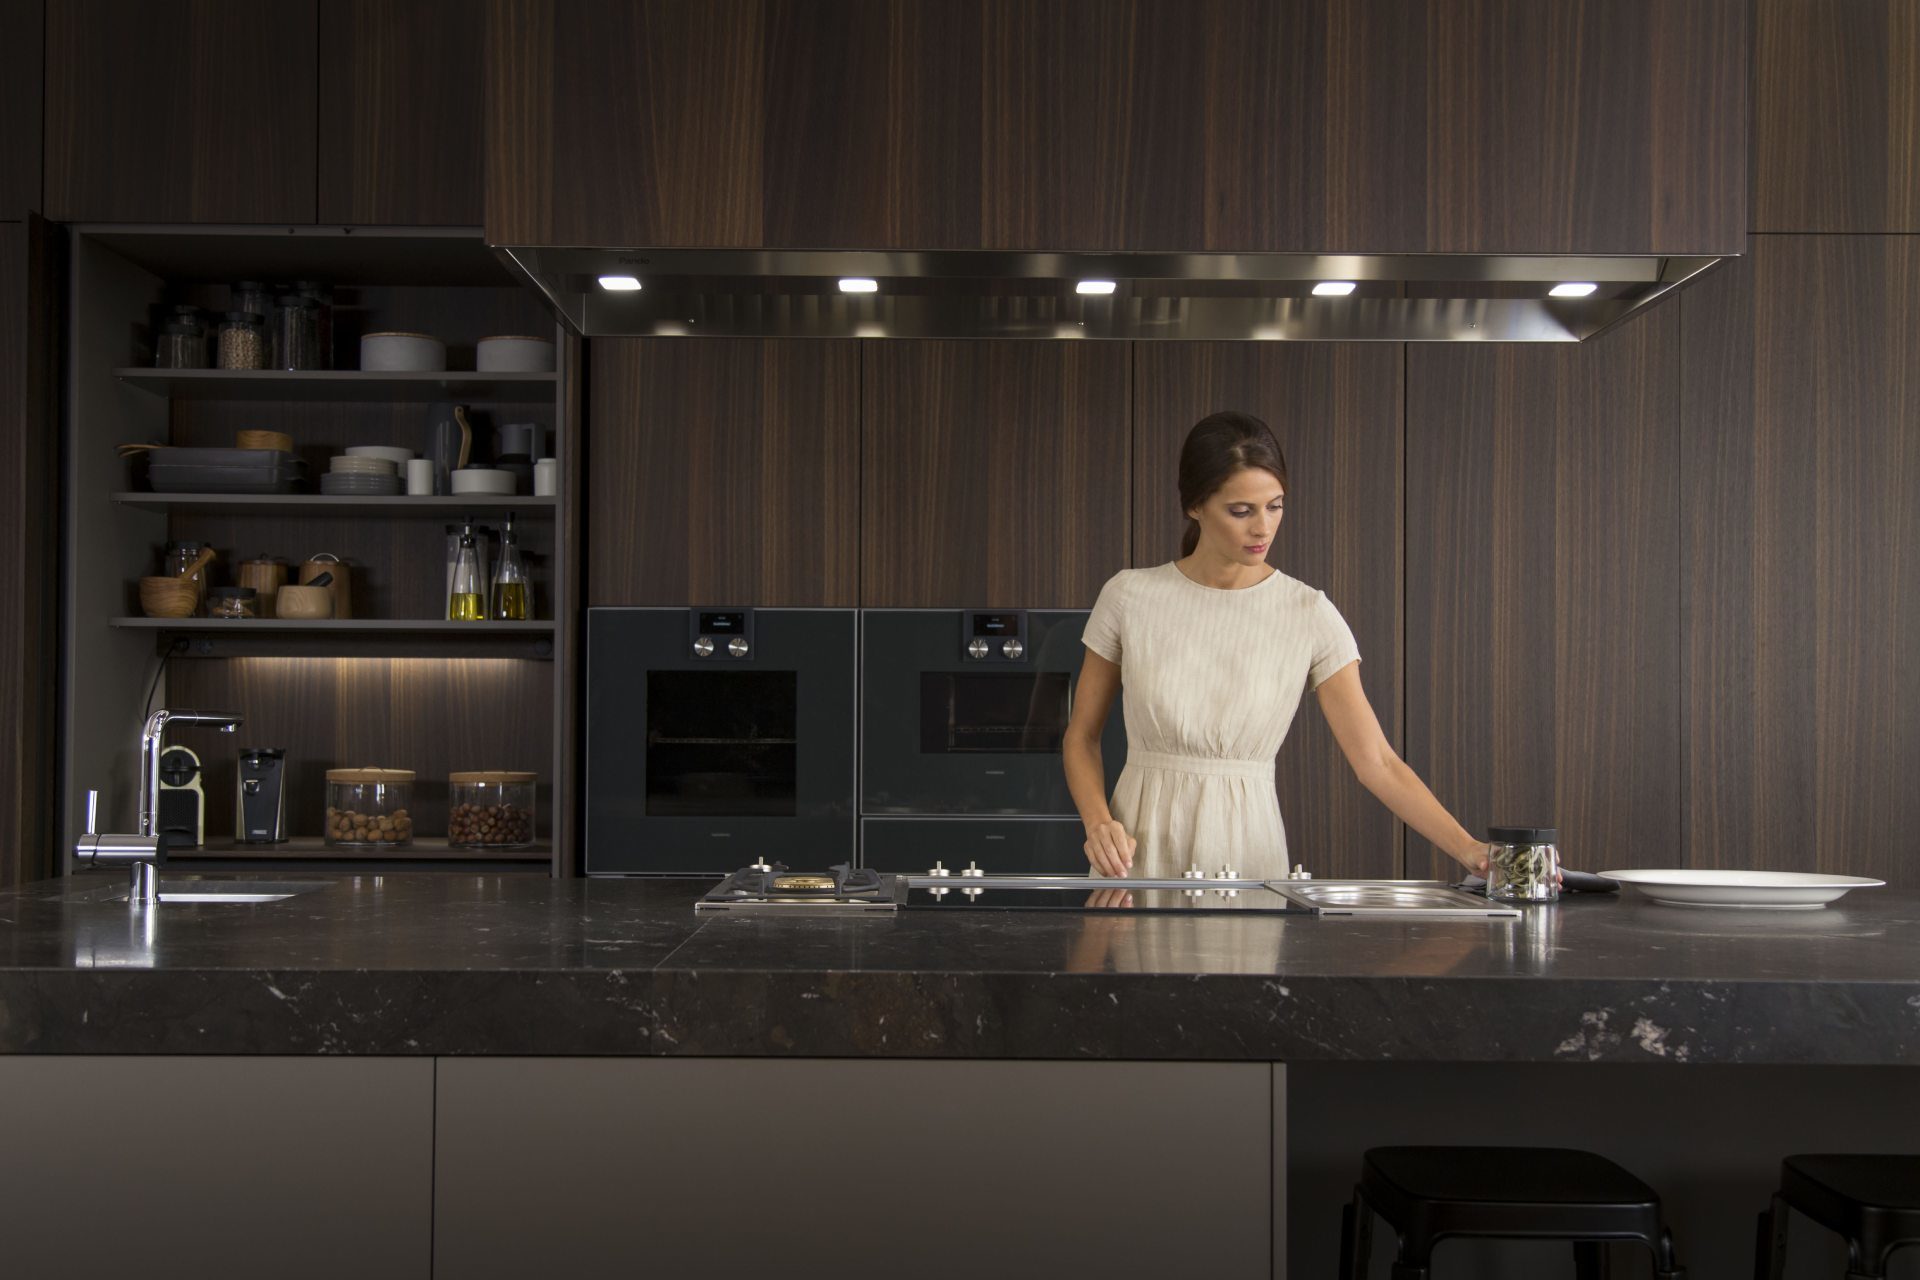 Photo of a woman in a Smoked Oak veneer kitchen with central island and extractor hood